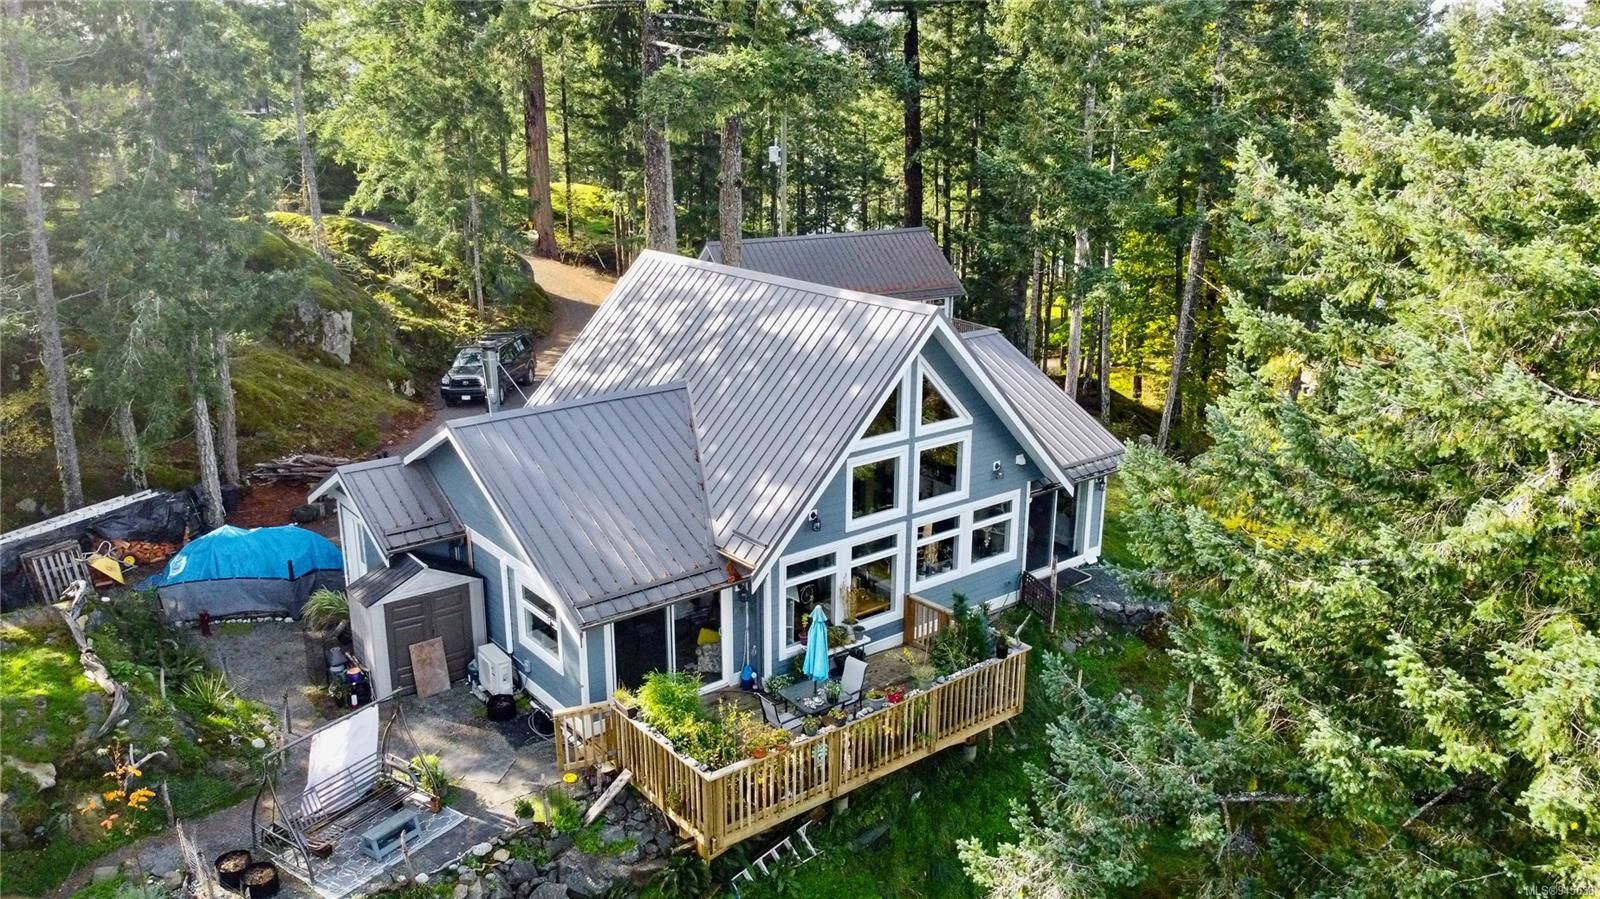 2 homes surrounded by towering trees on 1.95 acres